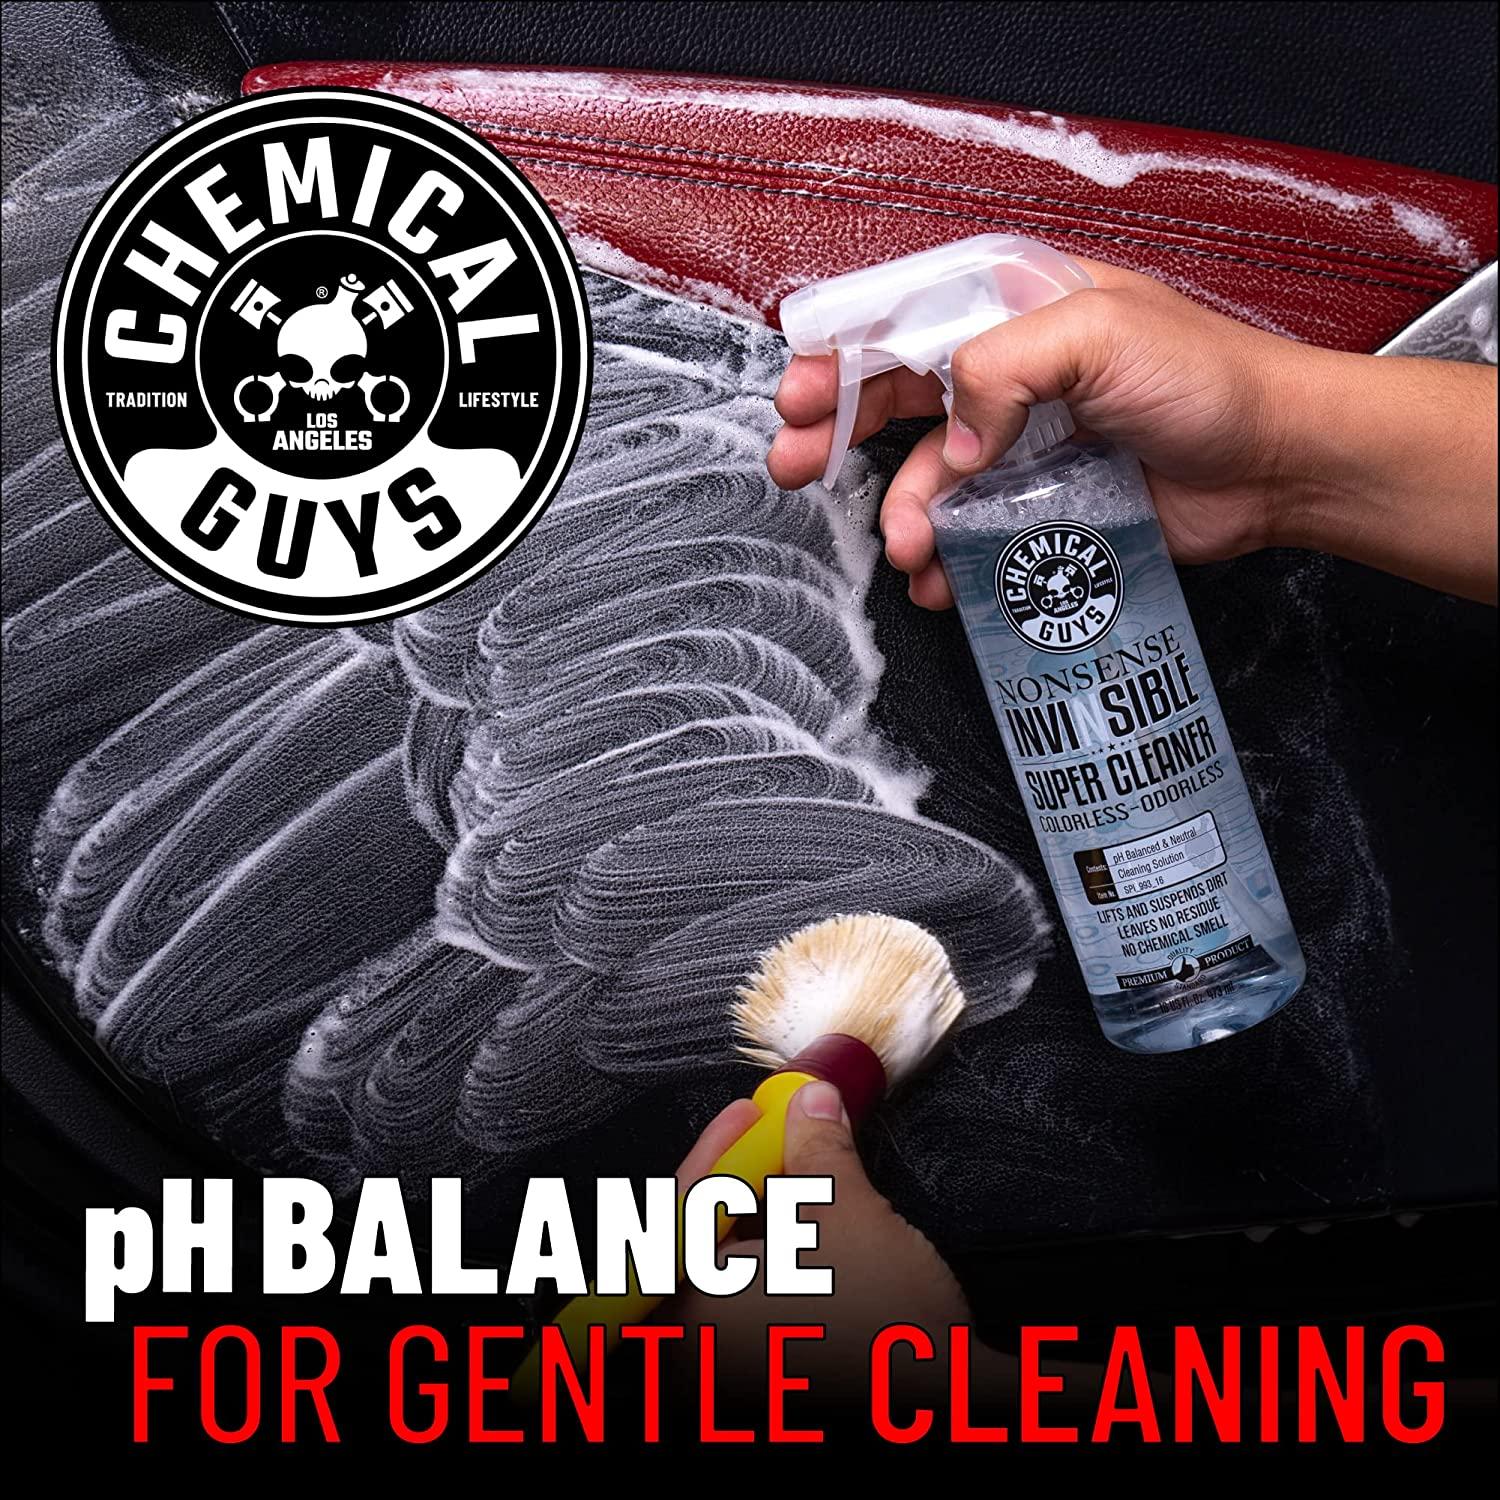 Chemical Guys NONSENSE Invisible Colorless & Odorless All Surface Cleaner  16 oz